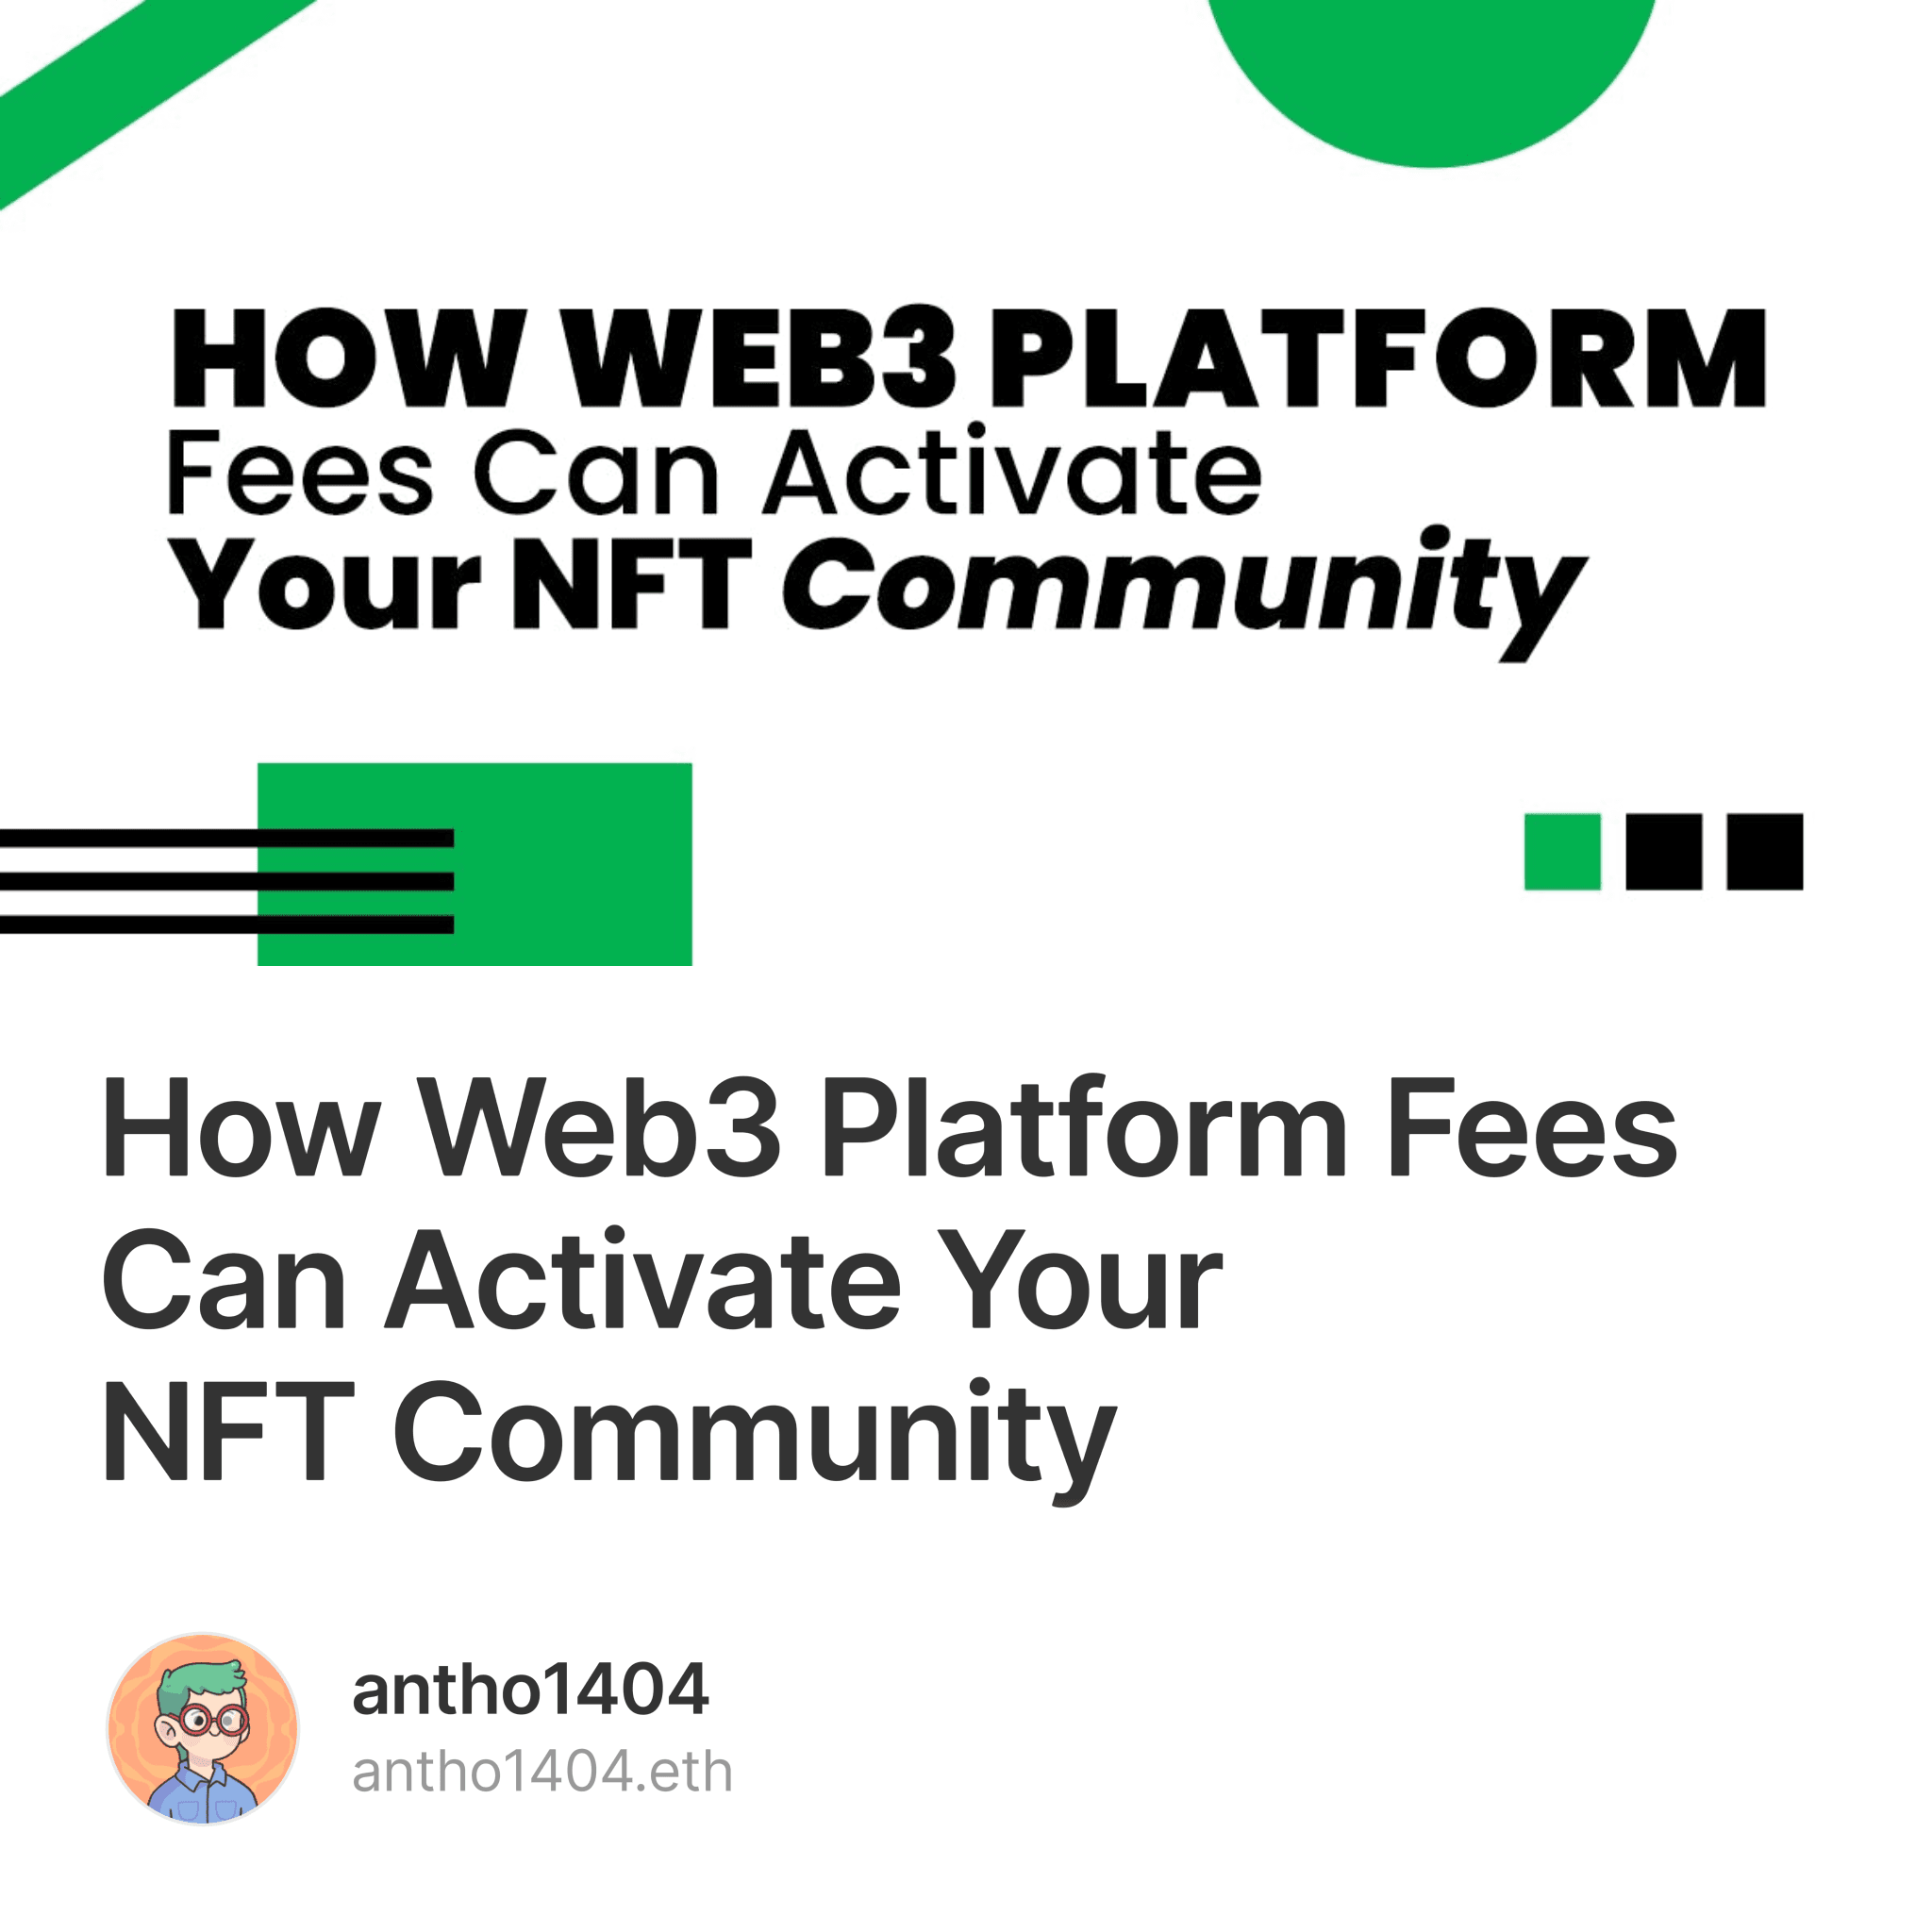 How Web3 Platform Fees Can Activate Your NFT Community 1/500